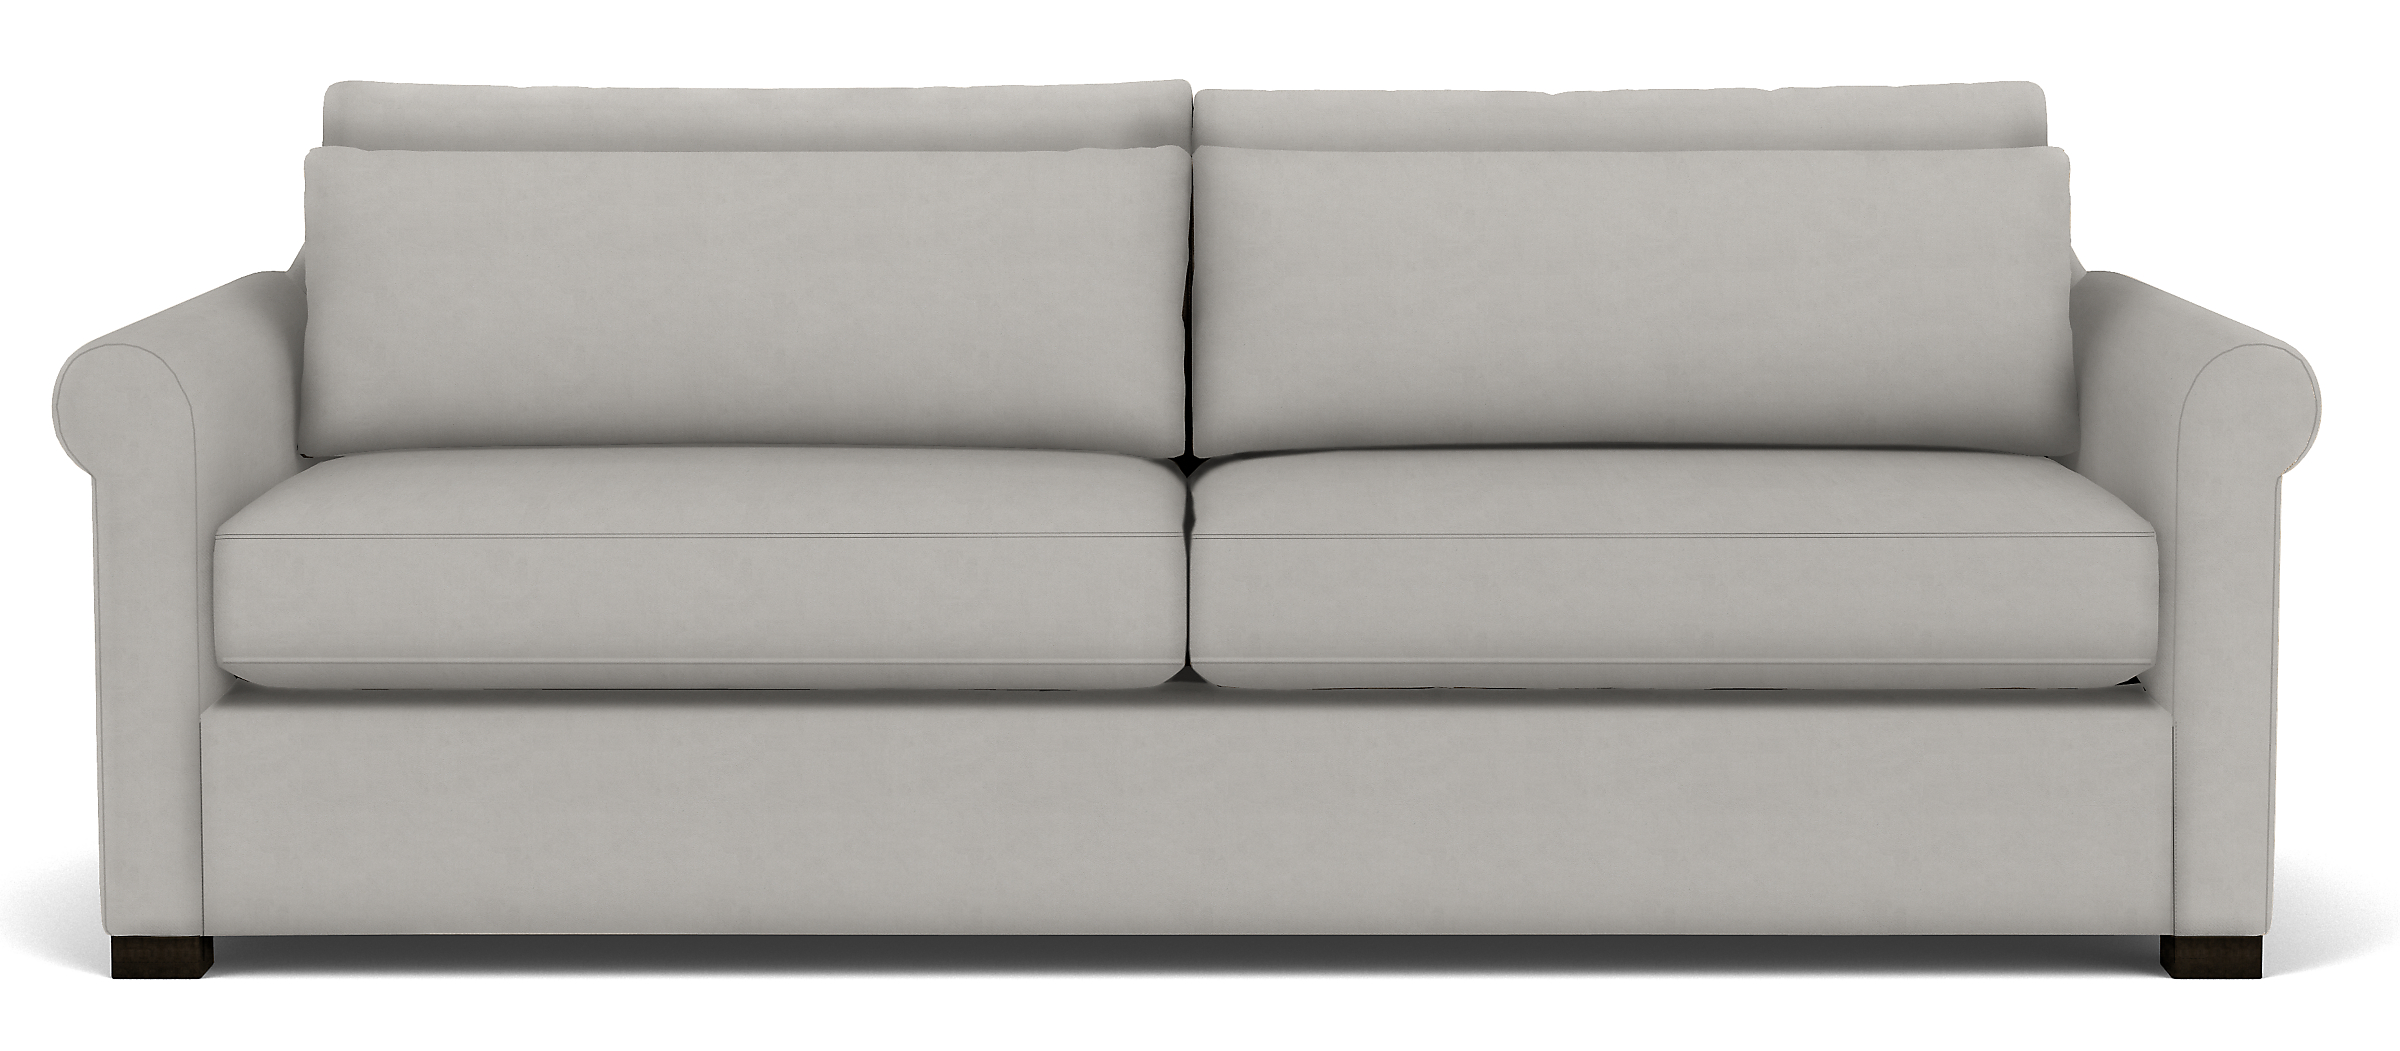 Tegan 86" Sofa in View Grey with Charcoal Legs